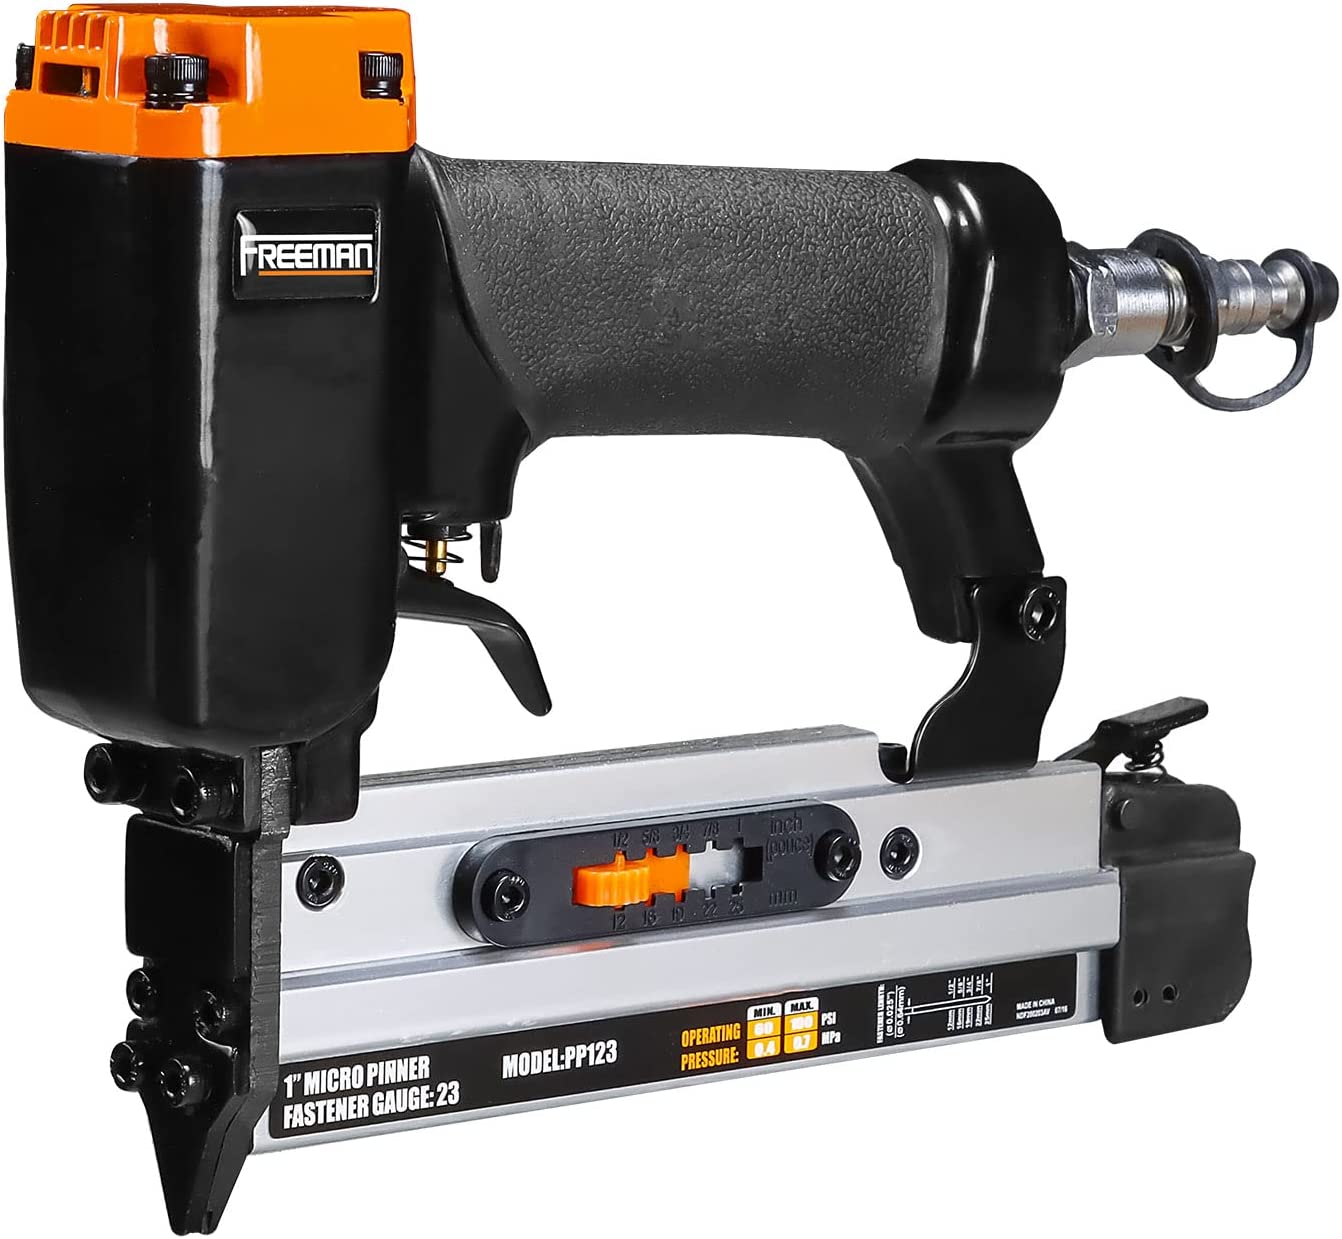 Freeman PP123 Pneumatic 23-Gauge 1" Micro Pinner Ergonomic and Lightweight Nail Gun with Safety Trigger and Pin Size Selector for Crafts, Moulding, and Picture Frames